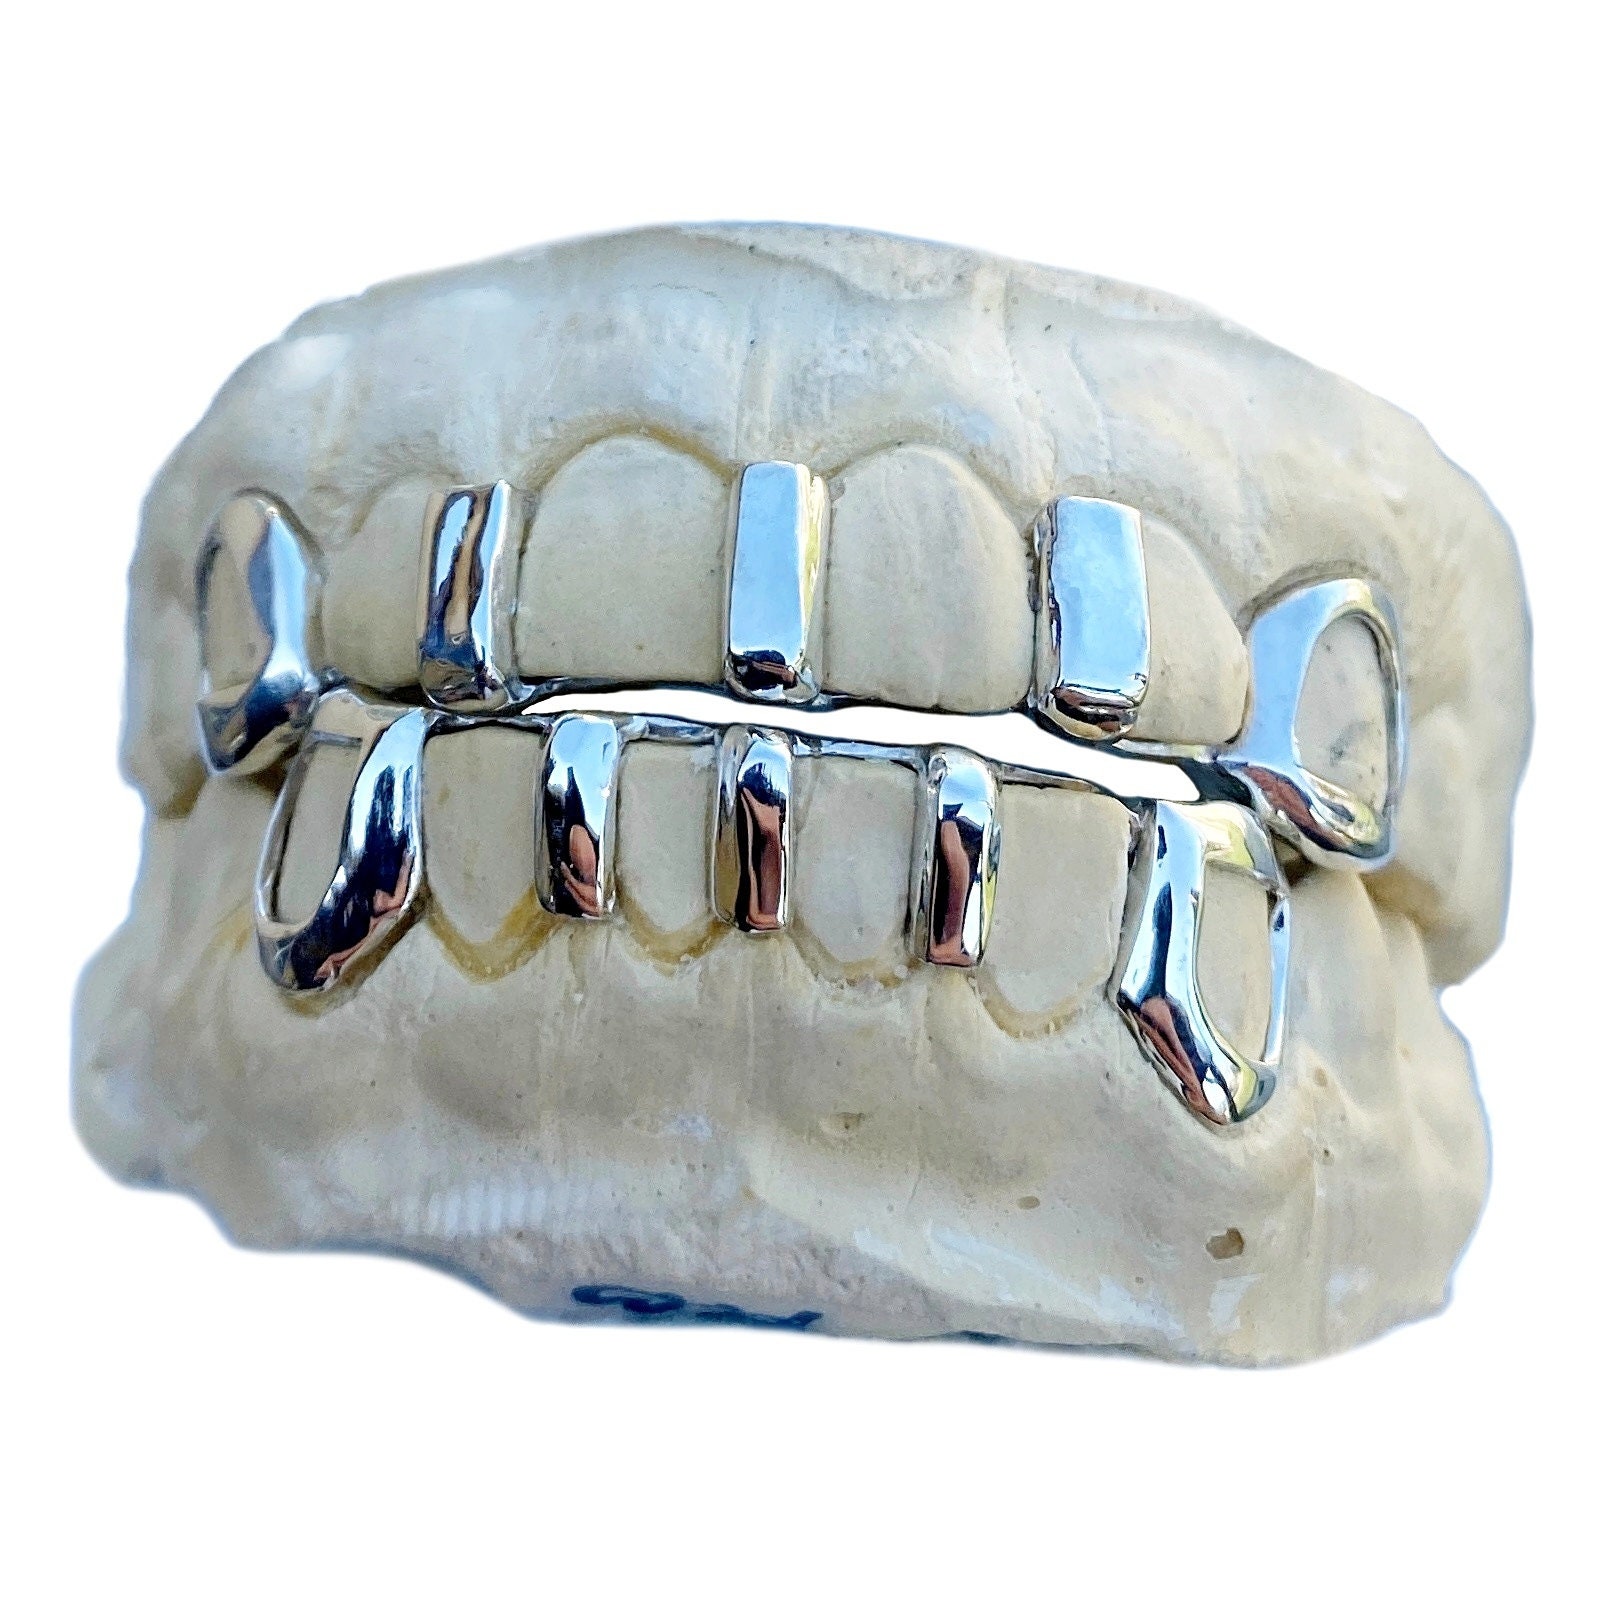 Custom Grillz Mold Kit for Teeth Impression Mouth Guard Mold Putty for Gold  or Silver Grills 